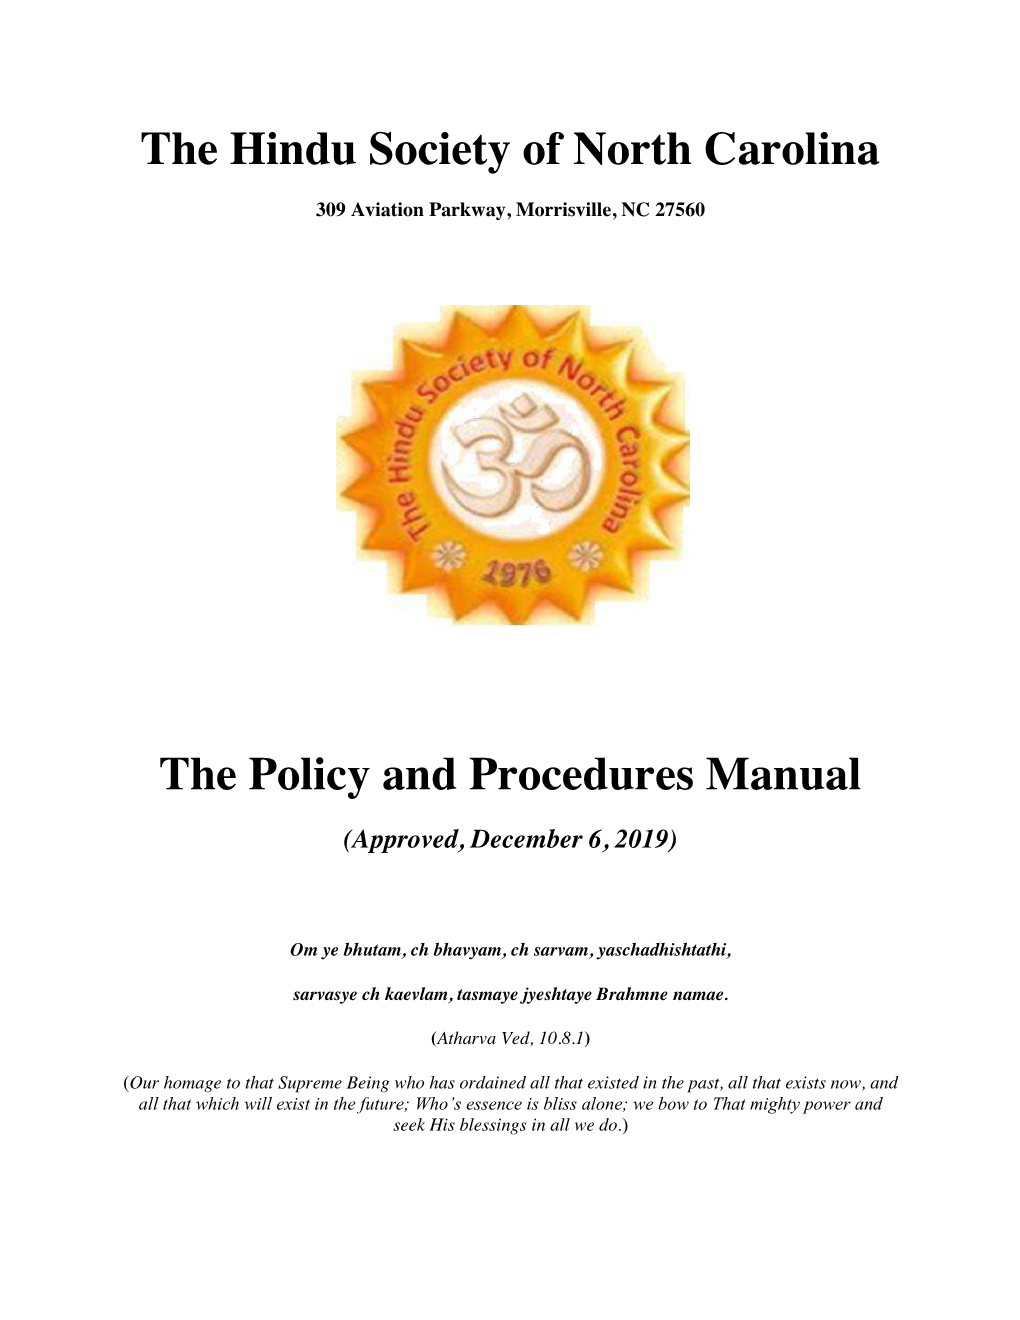 The Hindu Society of North Carolina the Policy and Procedures